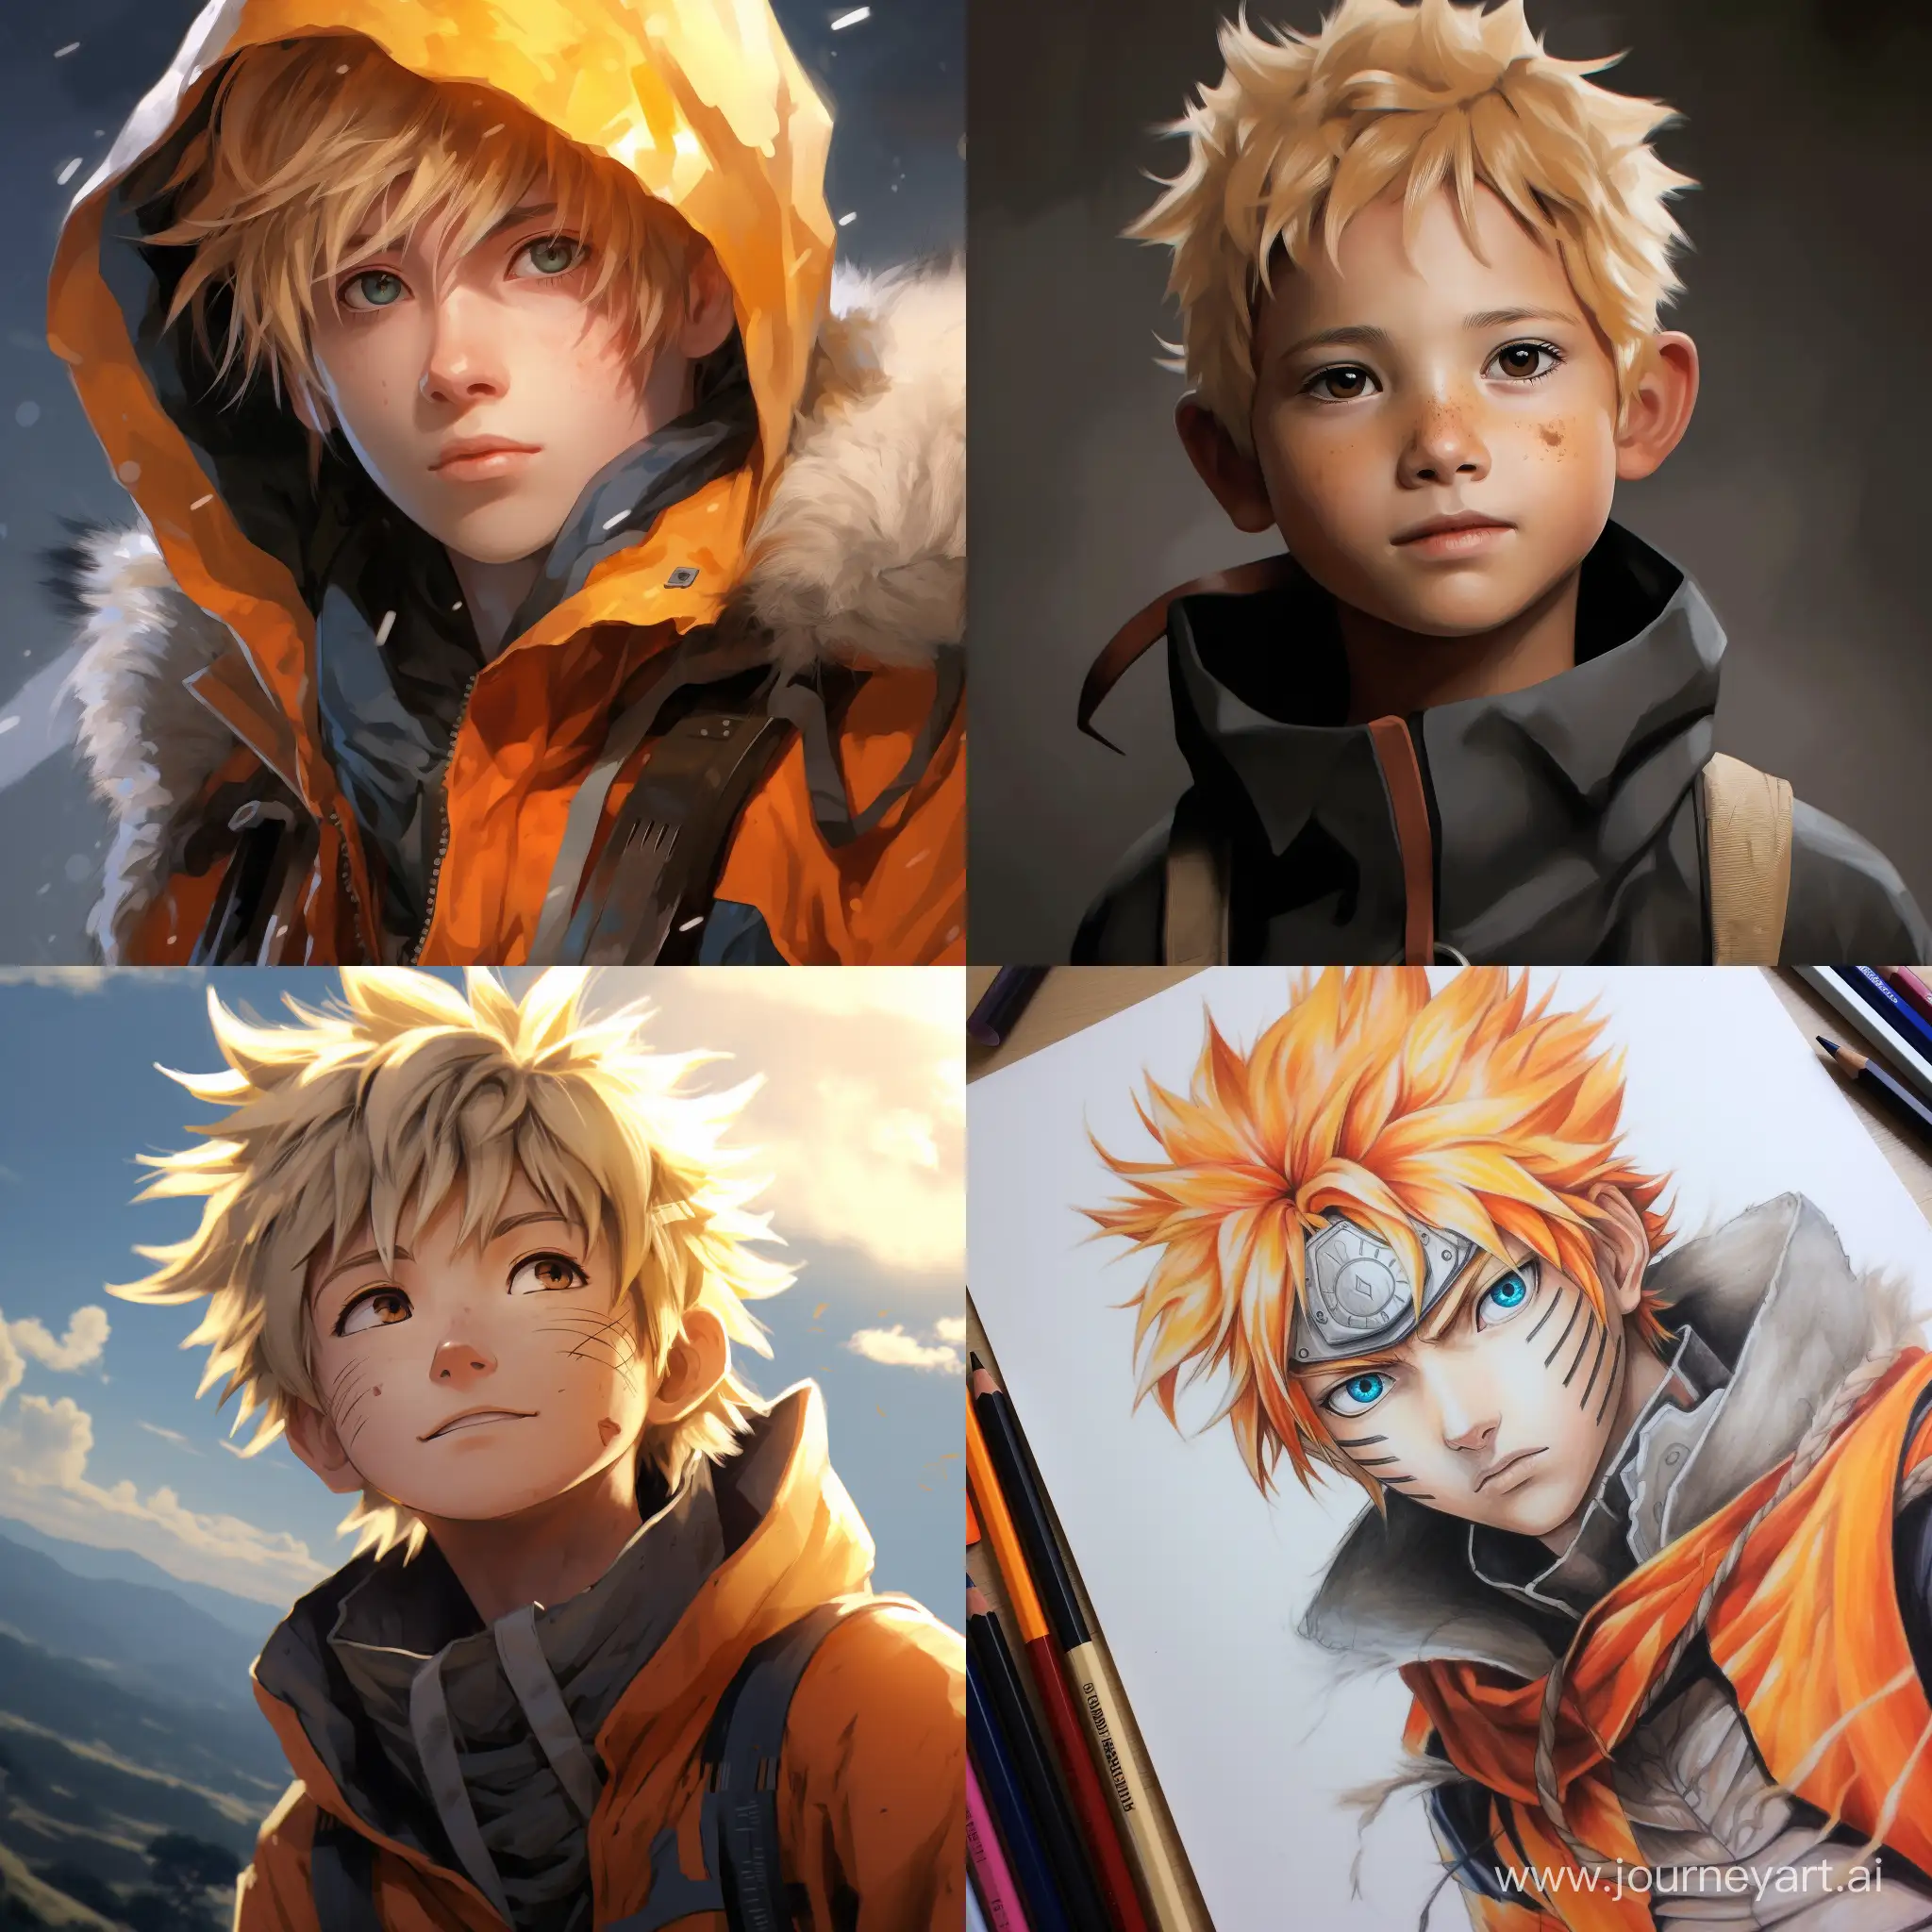 I want a super realistic picture of Naruto